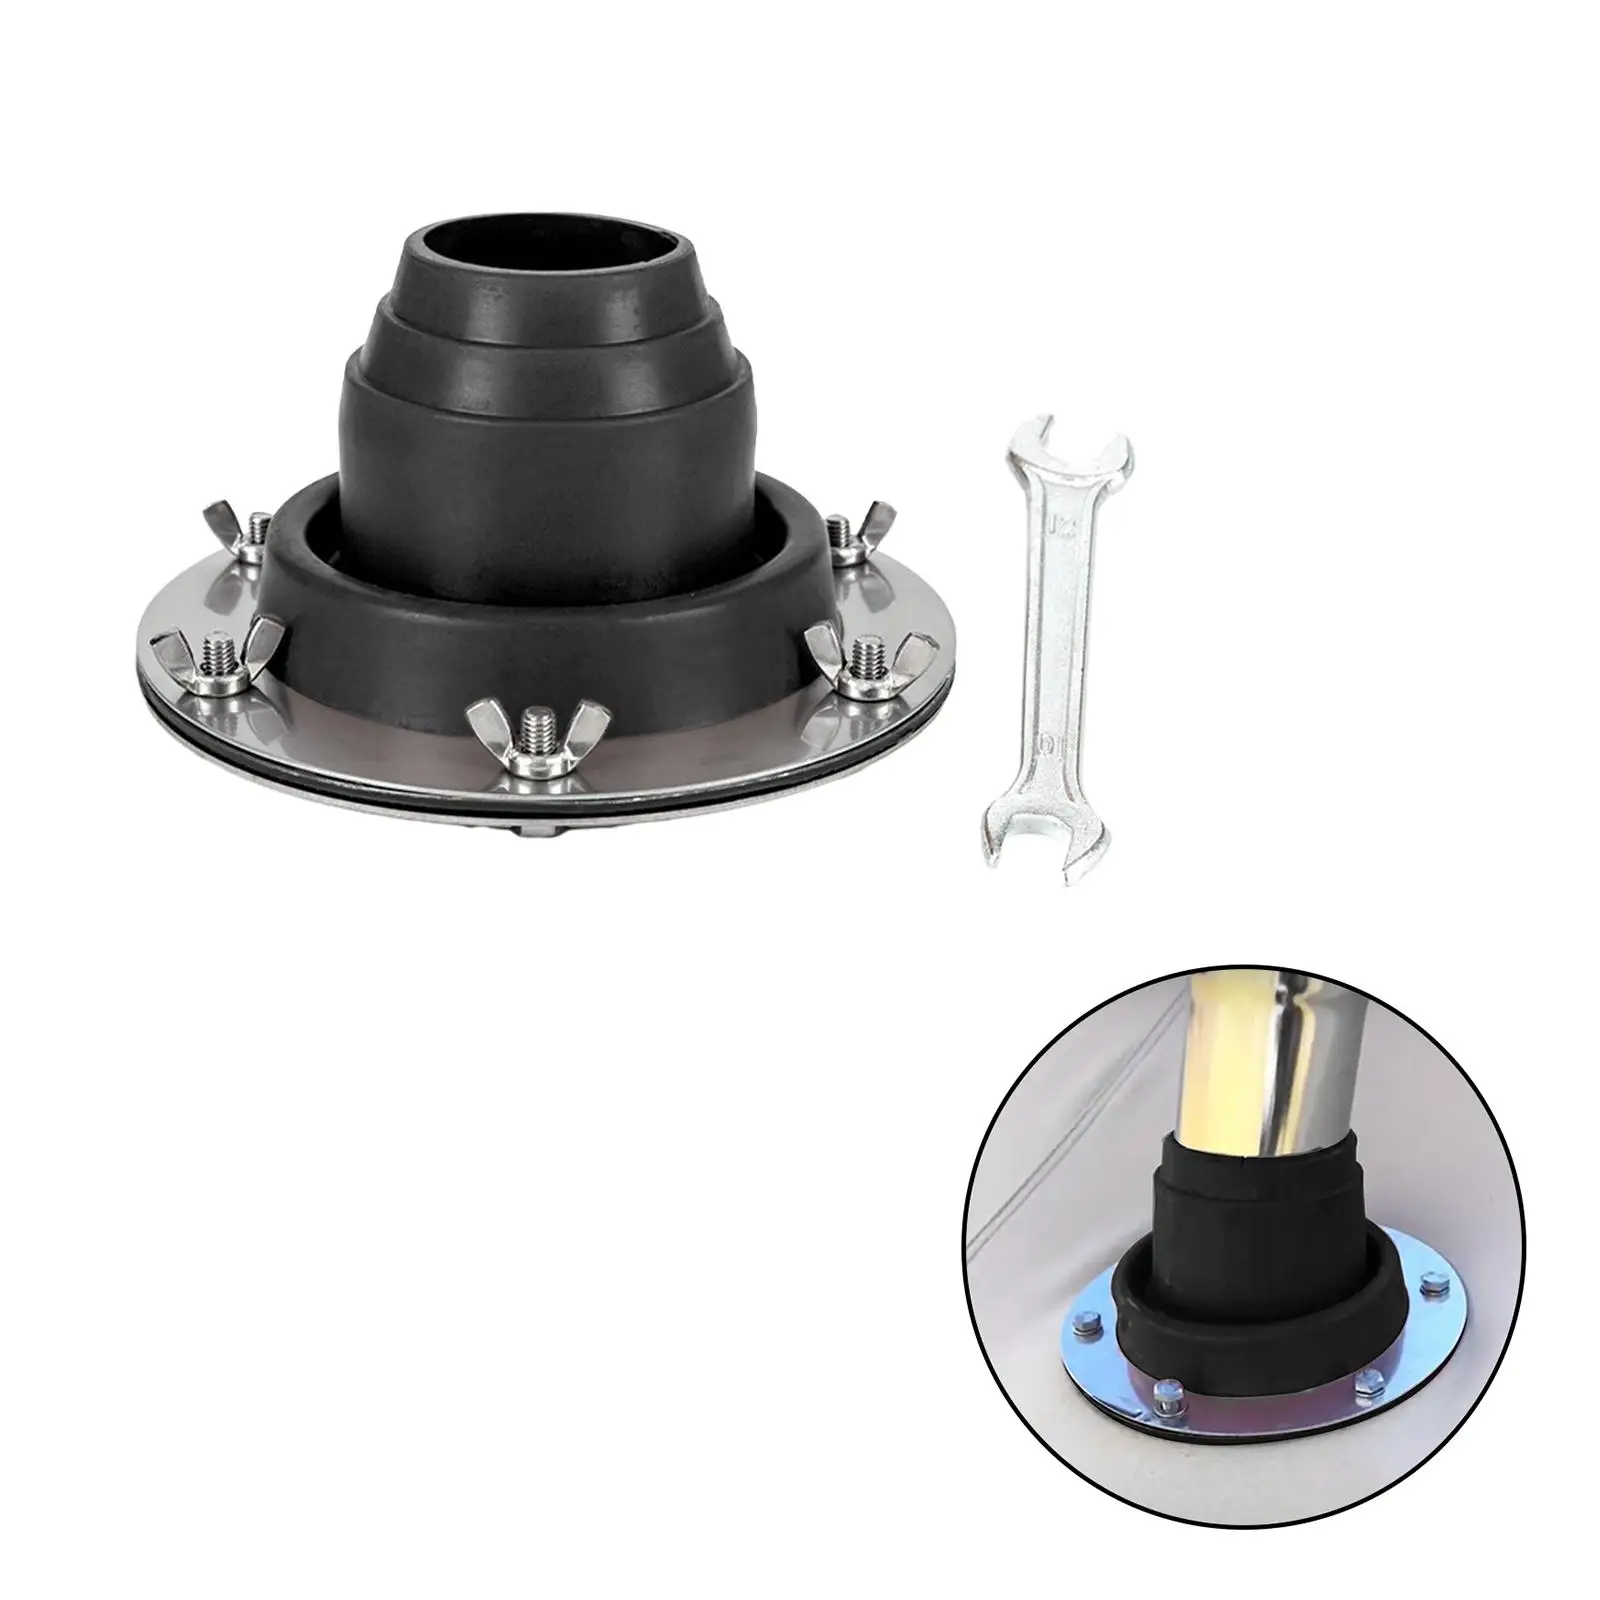 

Tent Stove Jack Round Base Firewood Stove Multifunctional Pipe Vent Pipe Flashing for Log Cabins Garages Outdoor Hot Stove Tent